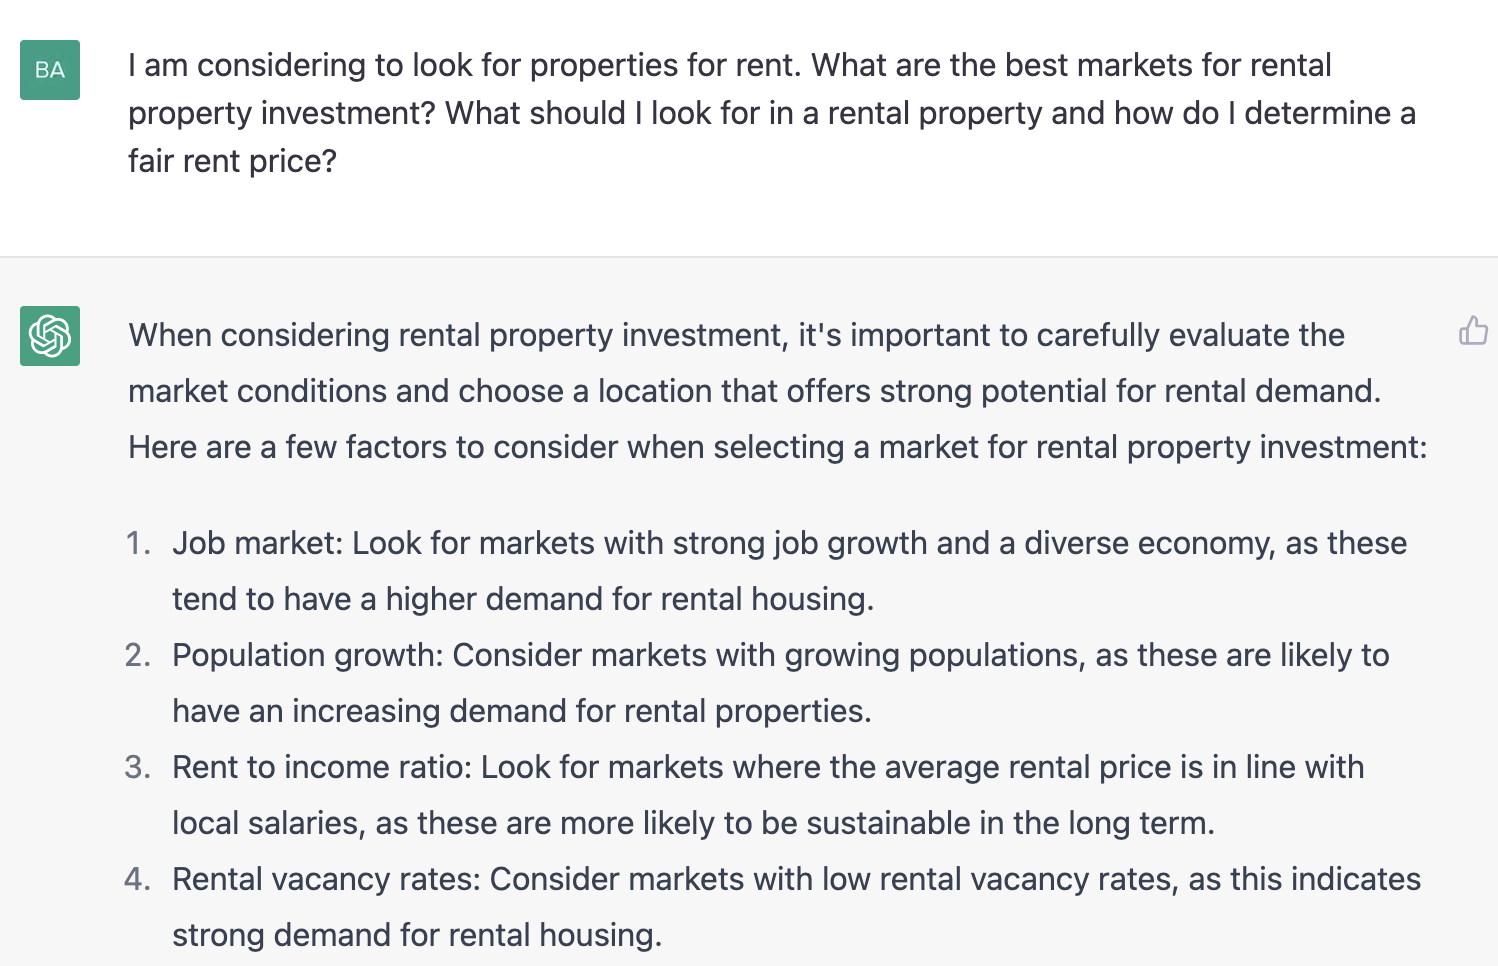 ChatGPT prompt about the best markets for rental property investment